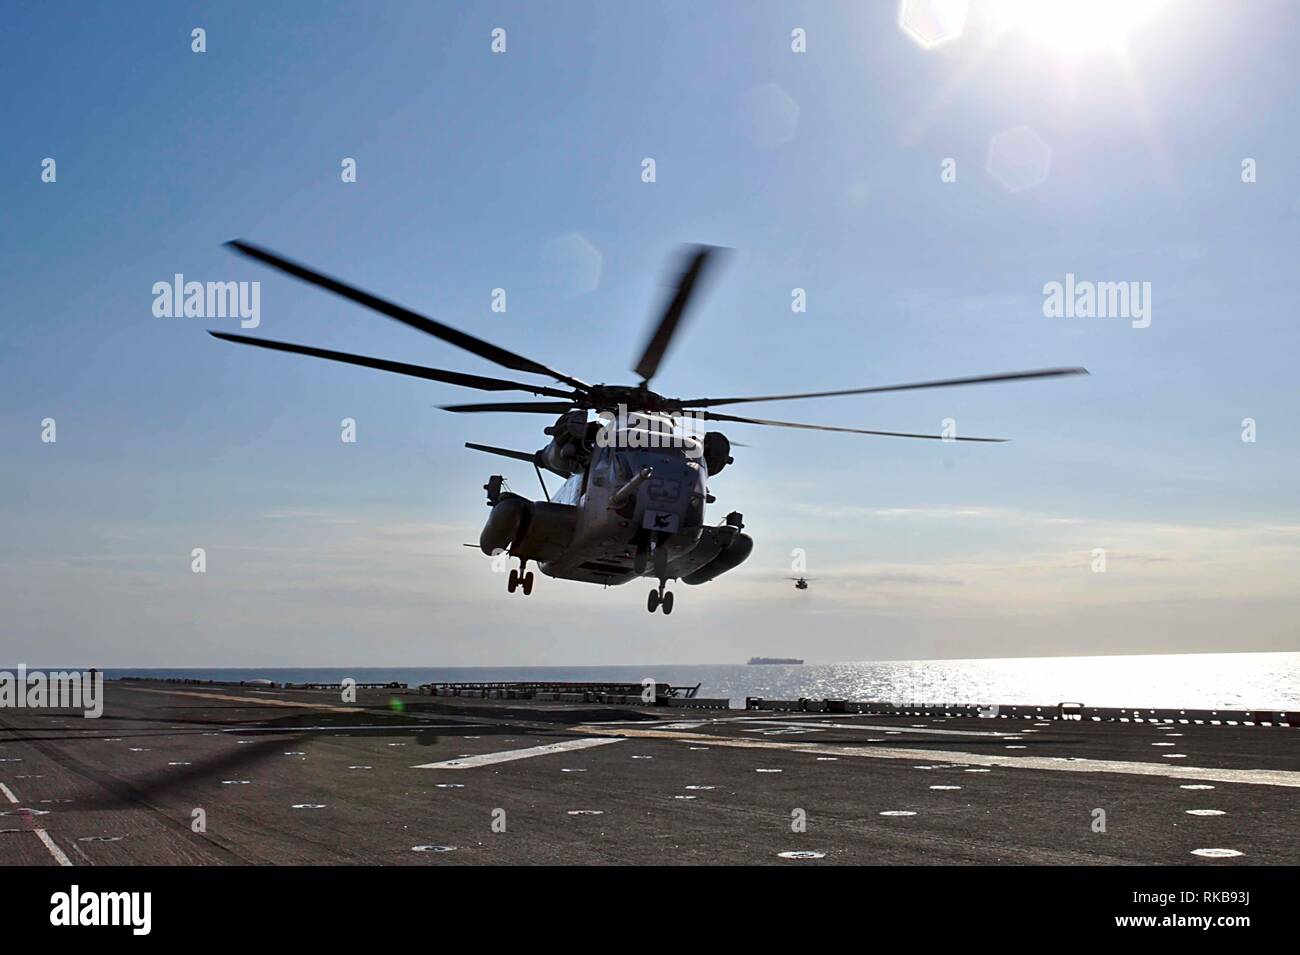 190205-M-QP631-1008 ARABIAN SEA (Feb. 1, 2019) A CH-53E Super Stallion with the 22nd Marine Expeditionary Unit prepares to land on the flight deck of the Wasp-class amphibious assault ship USS Kearsarge (LHD-3). The Super Stallion, attached to Marine Medium Tiltrotor Squadron 264 (Reinforced), was peforming routine flight operations. Marines and Sailors with the 22nd MEU and Kearsarge Amphibious Ready Group are deployed to the 5th Fleet area of operations in support of naval operations to ensure maritime stability and security in the Central Region, connecting the Mediterranean and the Pacific Stock Photo